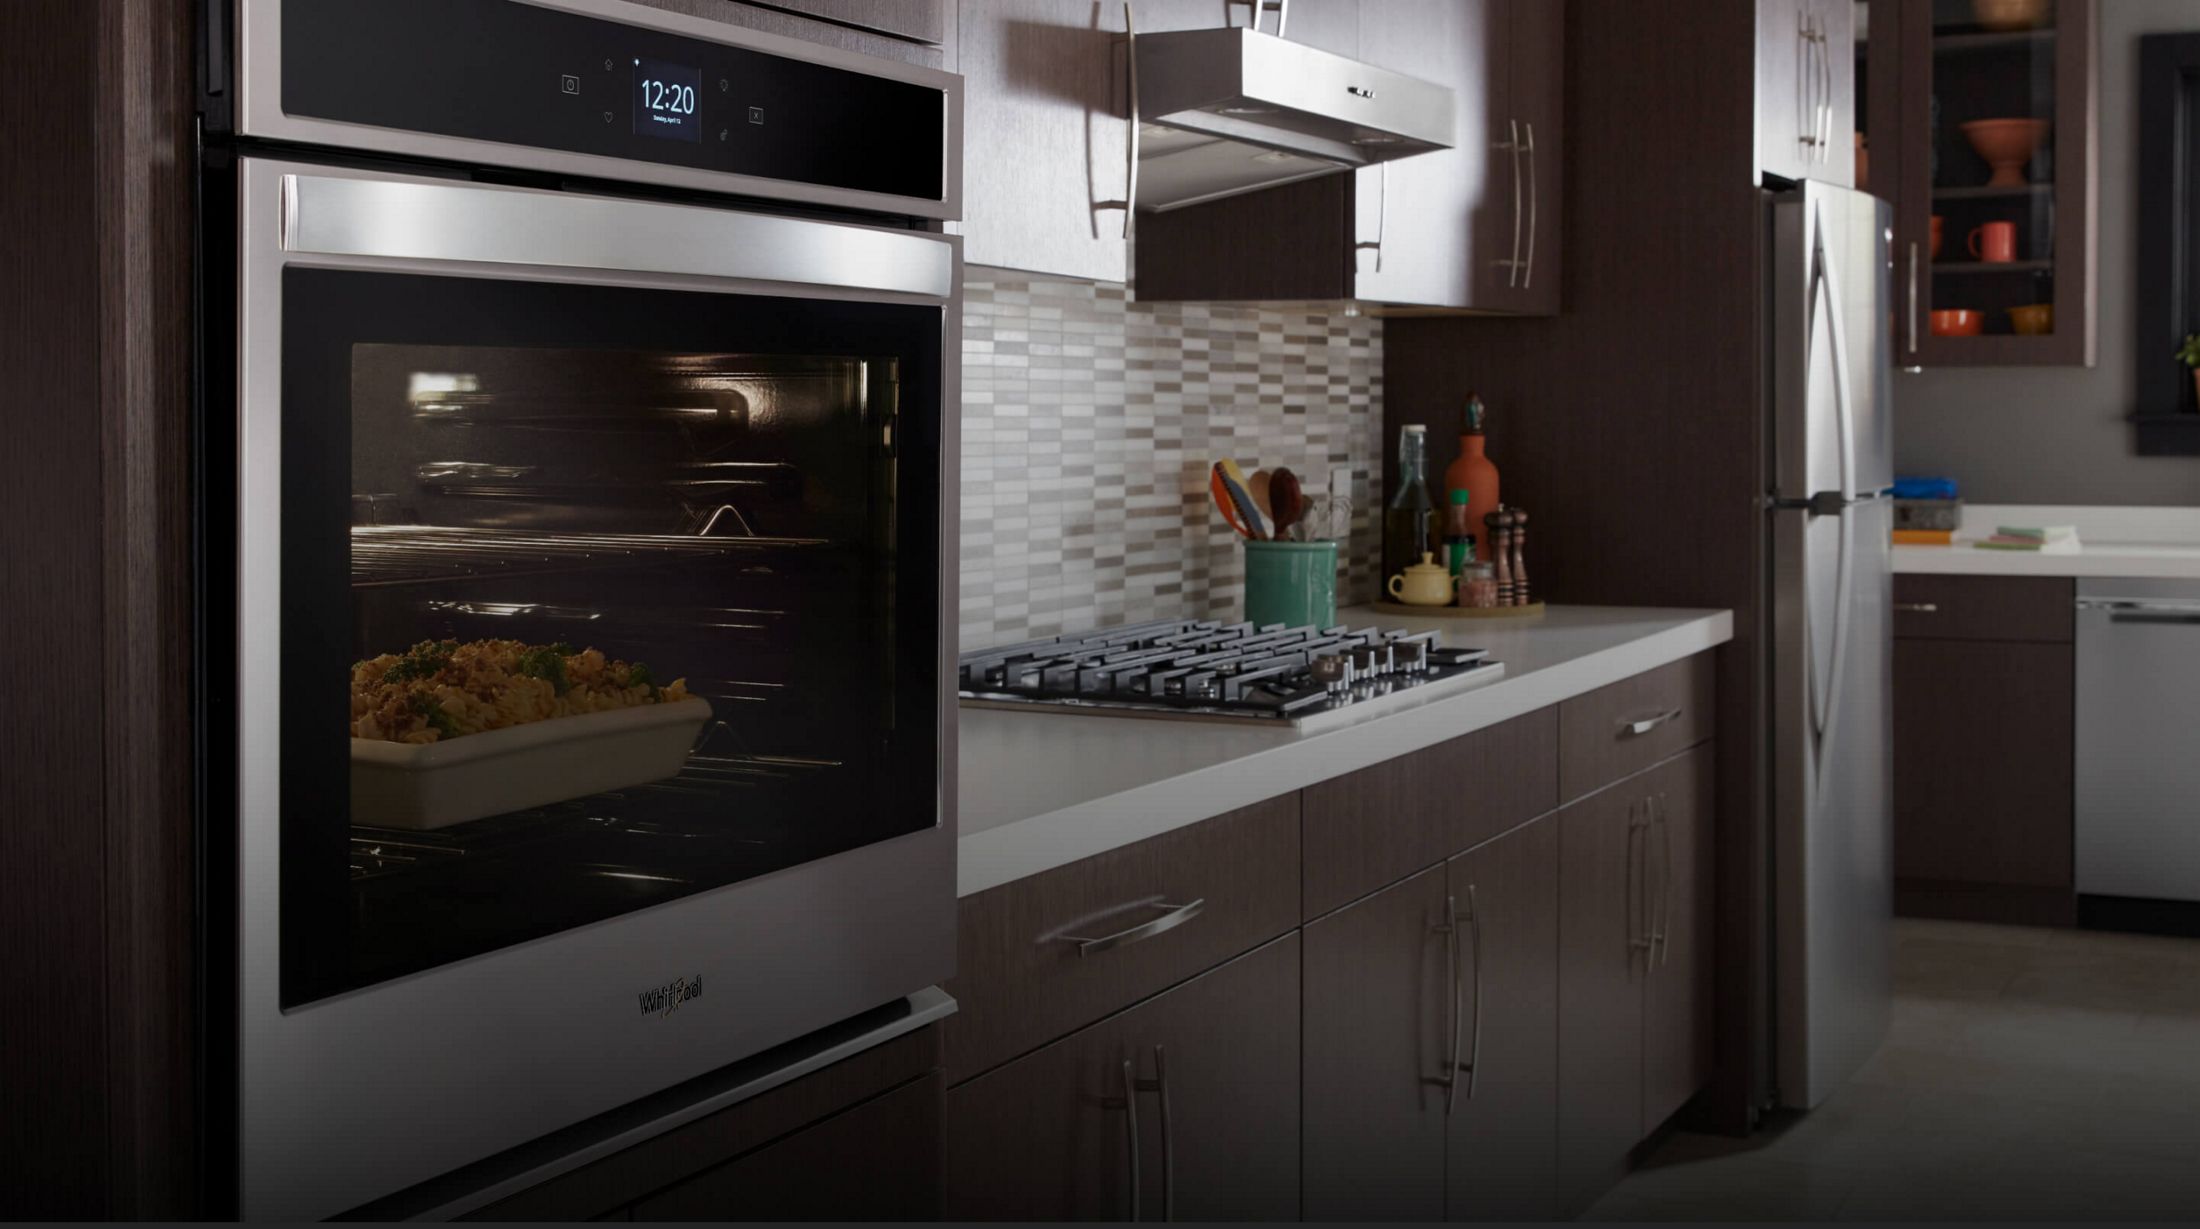 Whirlpool® Smart Wall Oven in a kitchen